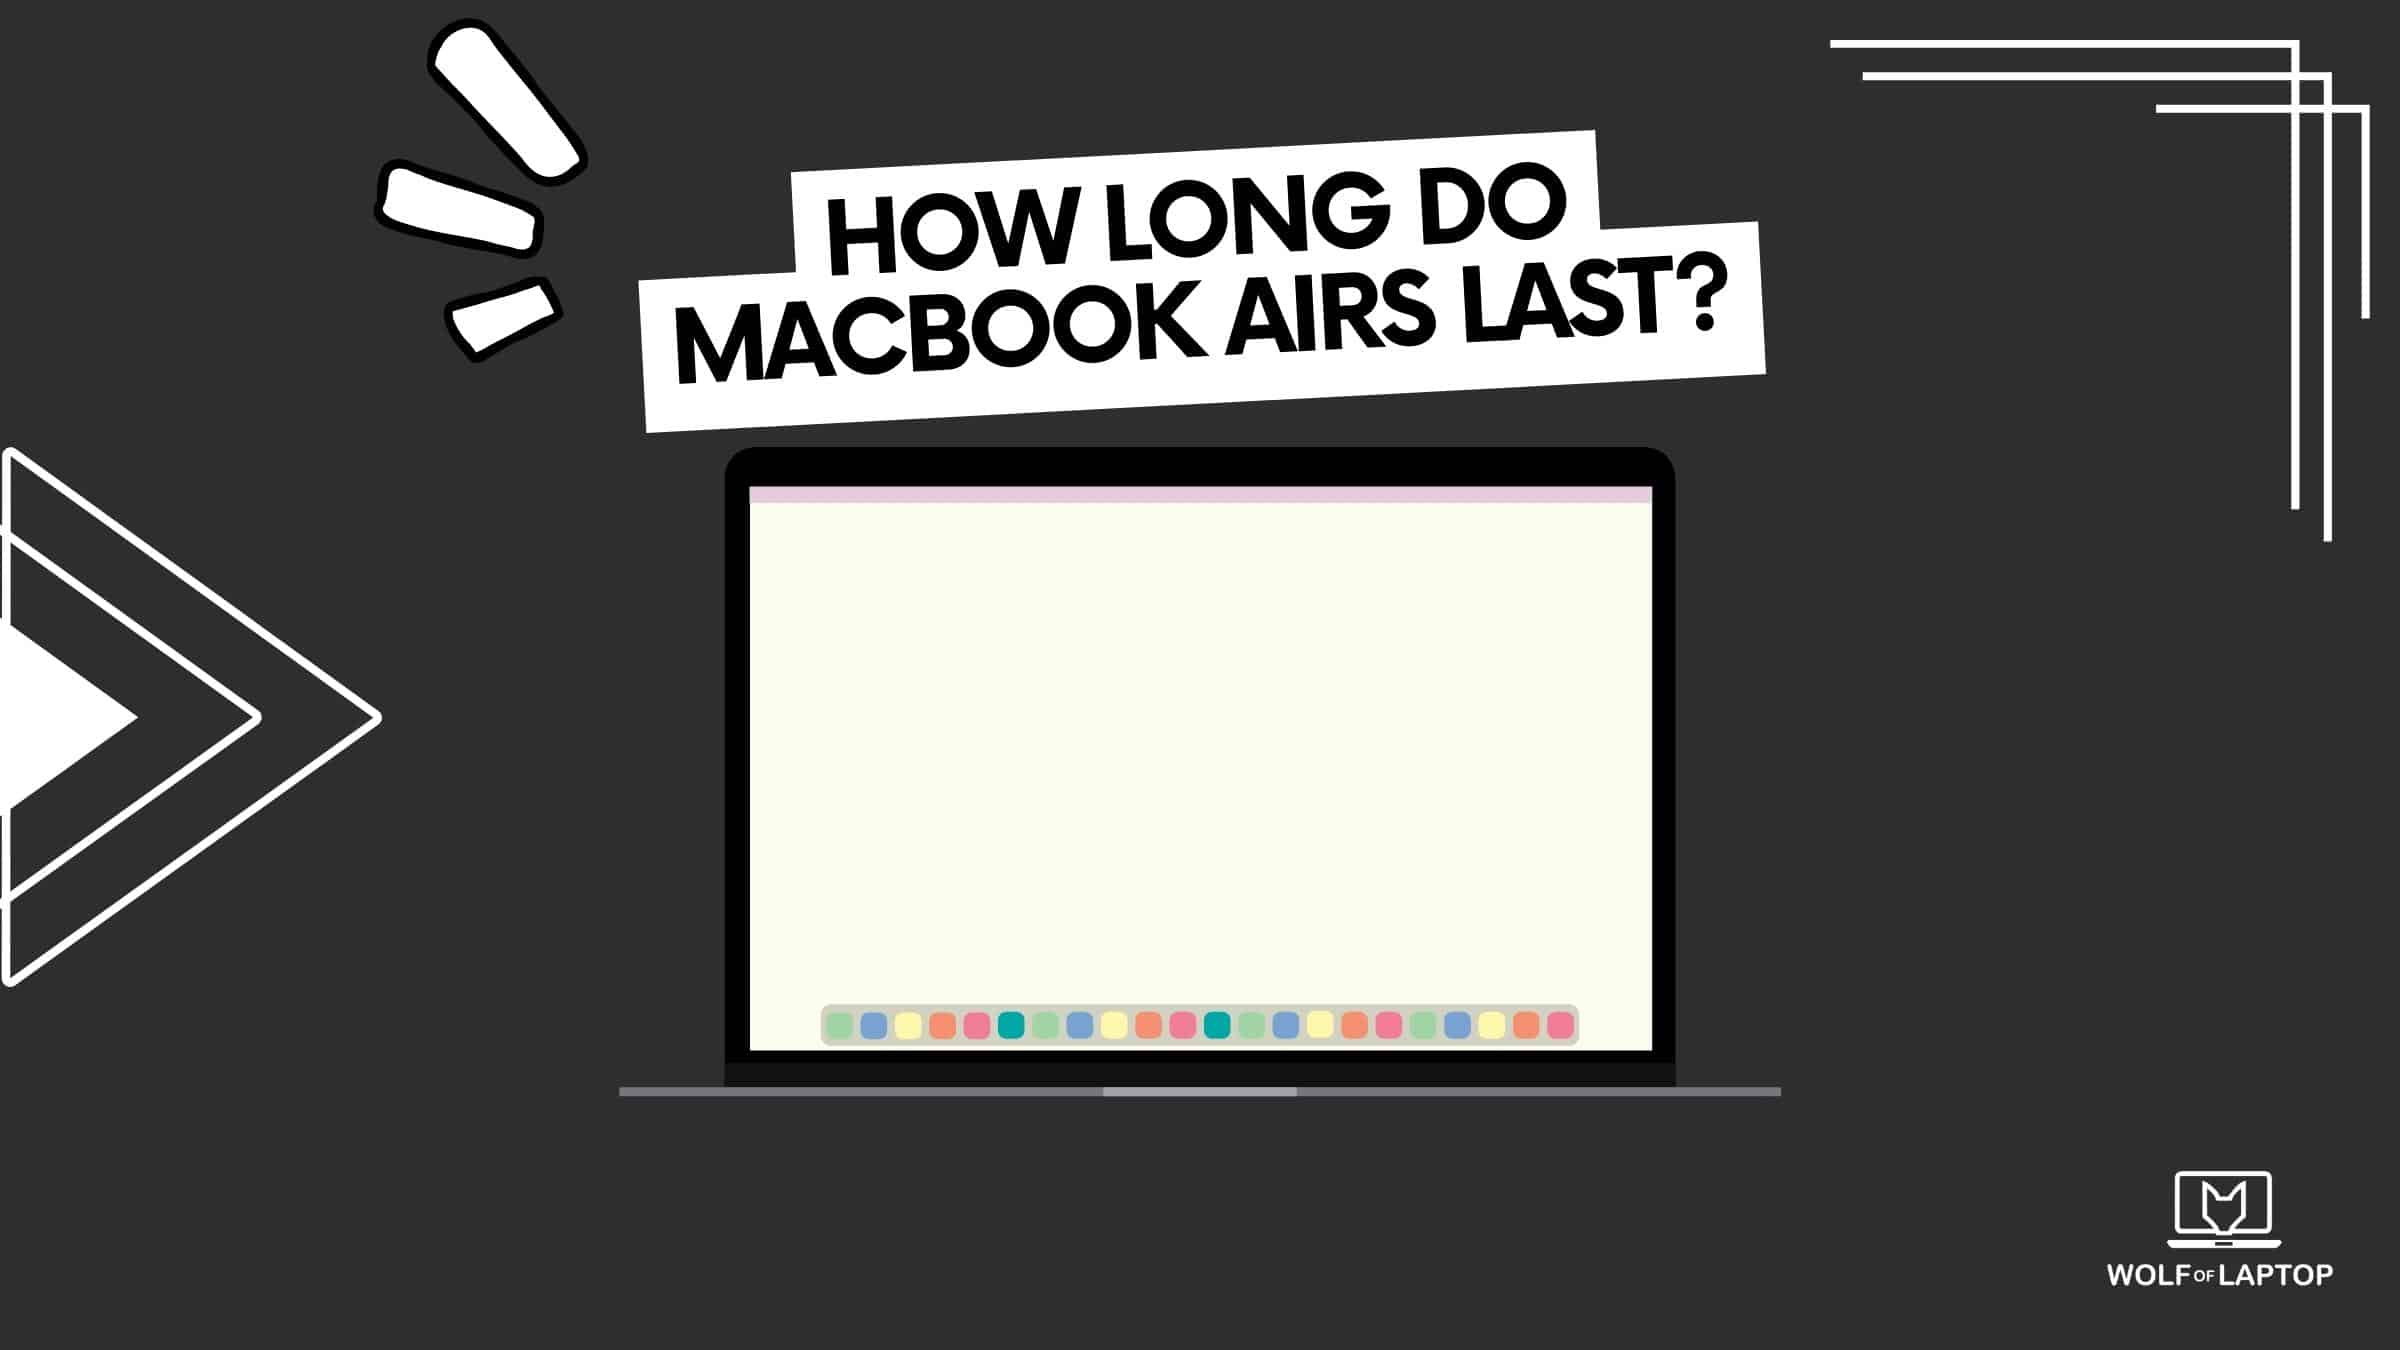 how long do macbook airs last on average - answered